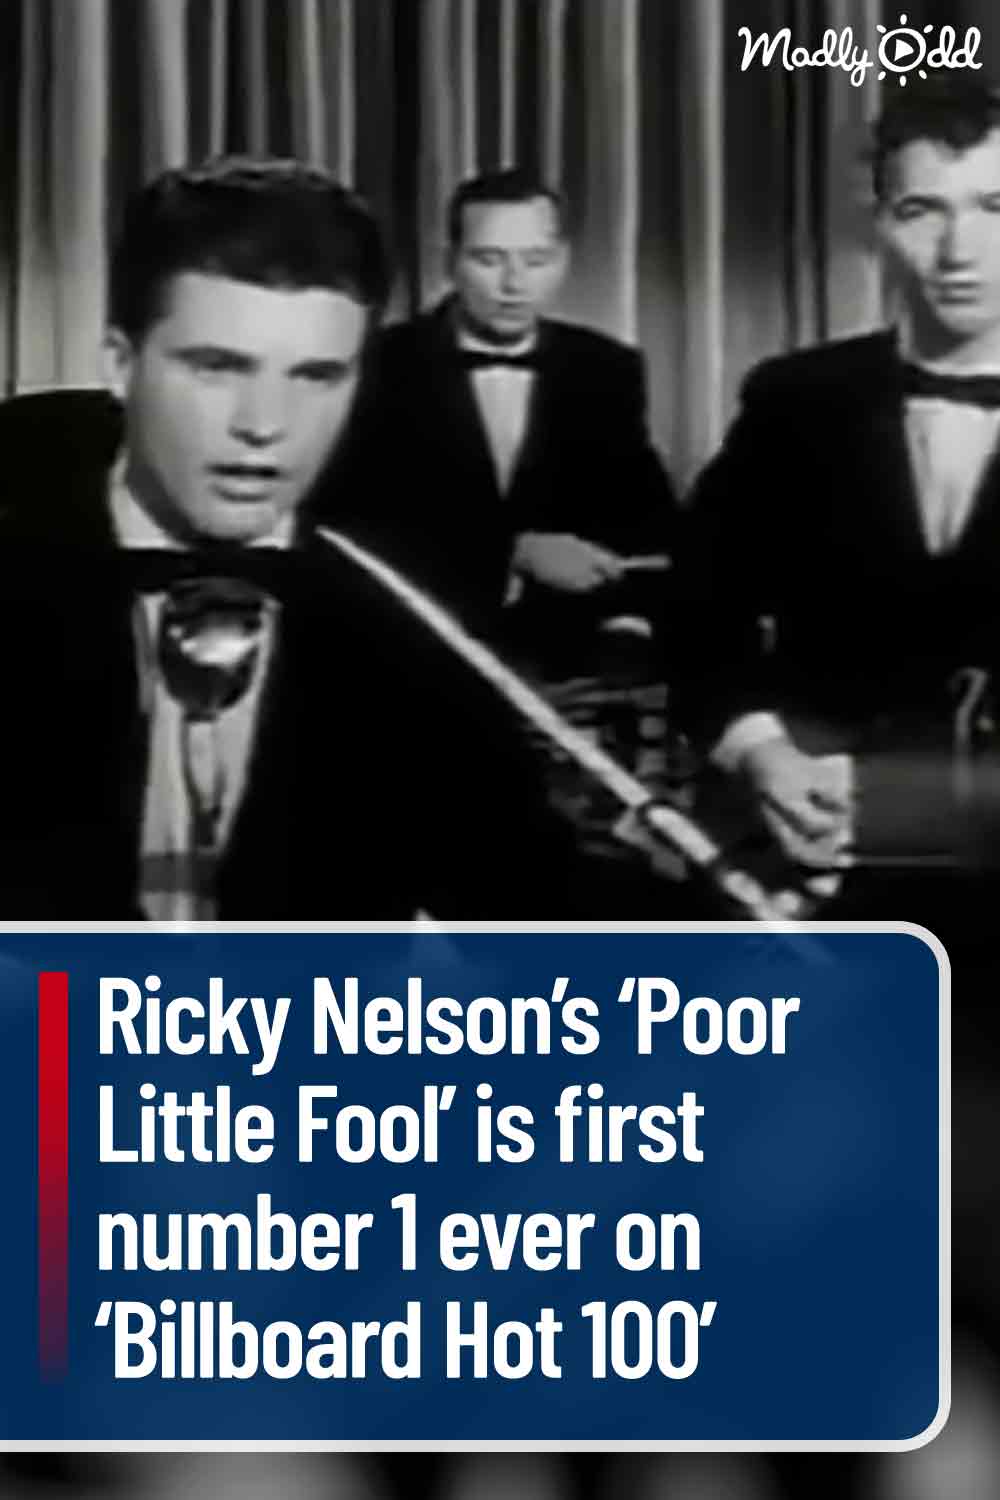 Ricky Nelson’s ‘Poor Little Fool’ is first number 1 ever on ‘Billboard Hot 100’